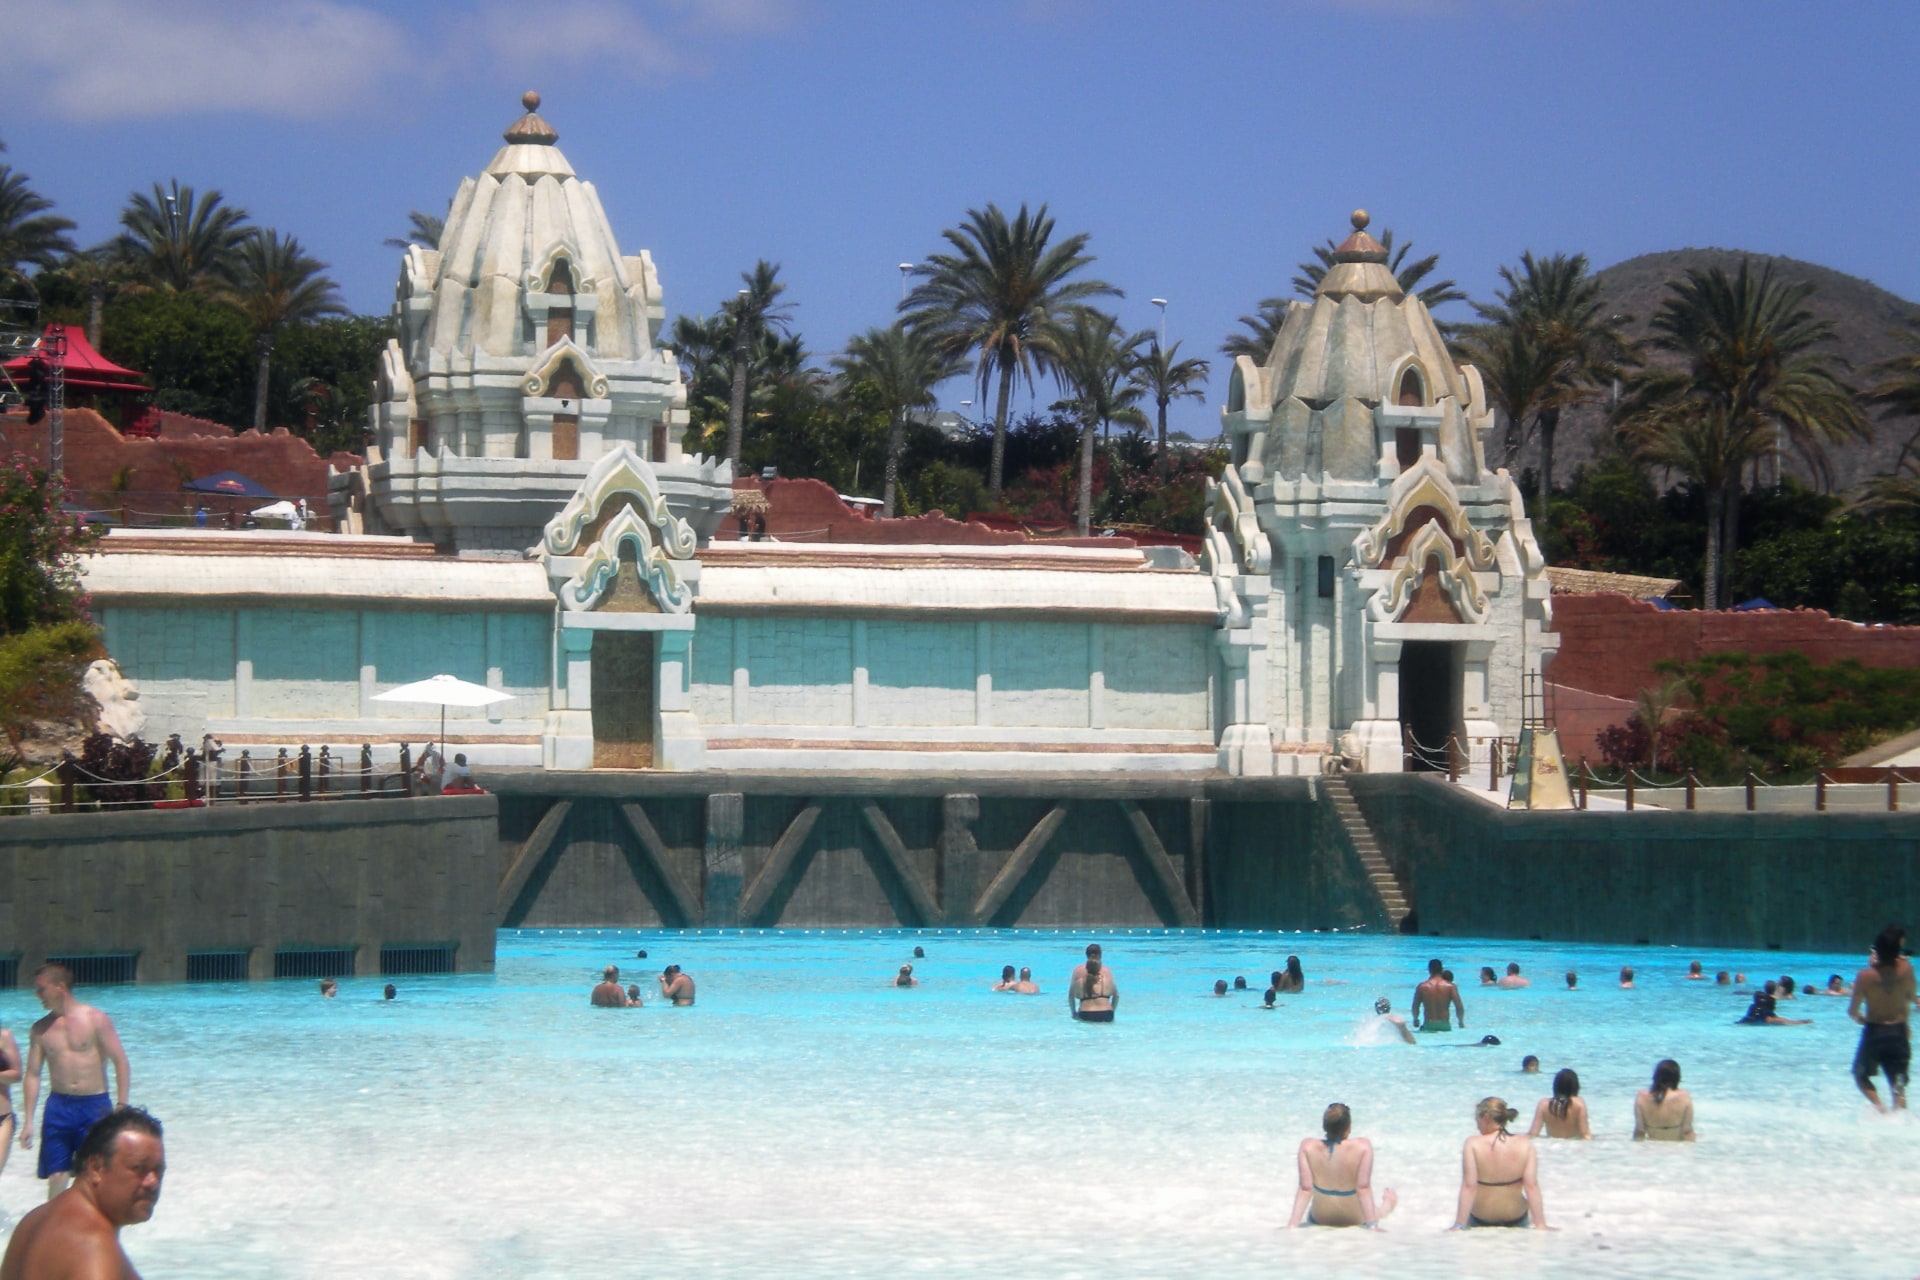 Relaxing beach area at Siam Park, Tenerife, providing a tranquil spot for visitors to unwind and enjoy the sun